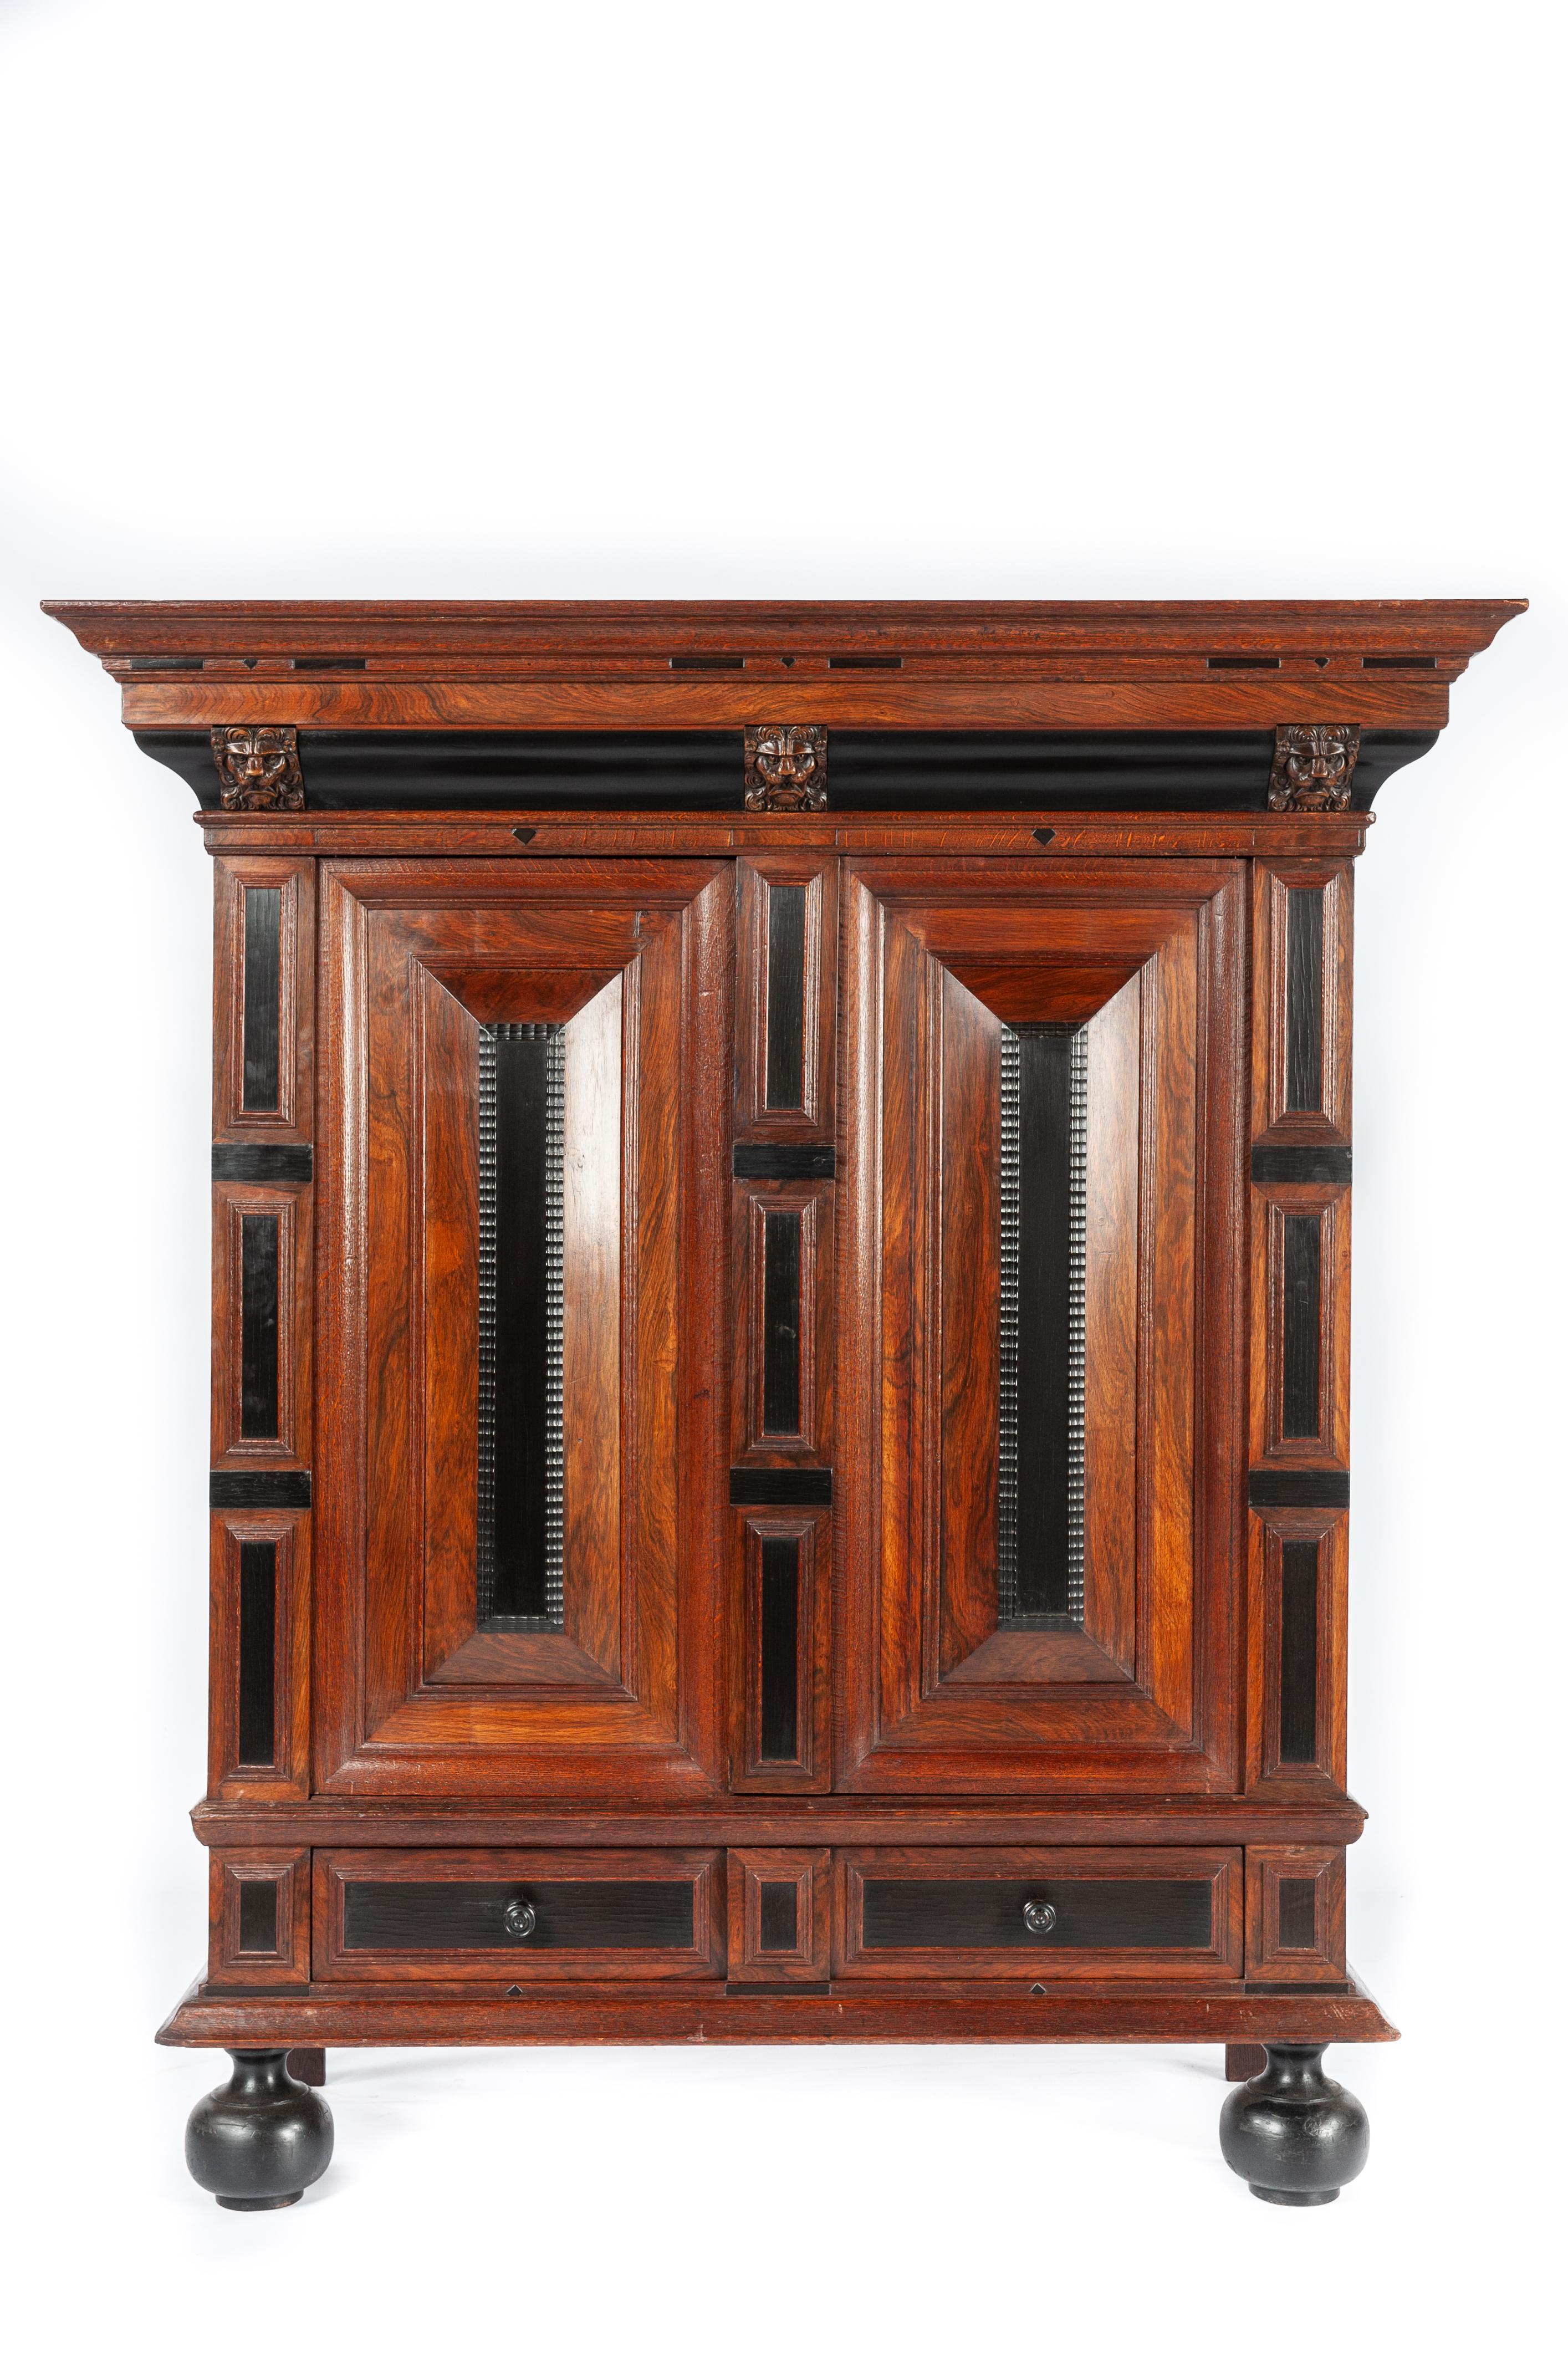 This beautiful and friendly-sized cupboard is made of the finest watered oak in the tradition of the Dutch Renaissance during the “Dutch golden age” It is a two-door cabinet over ebonized bun feet. This cabinet is made in the Dutch Provence of